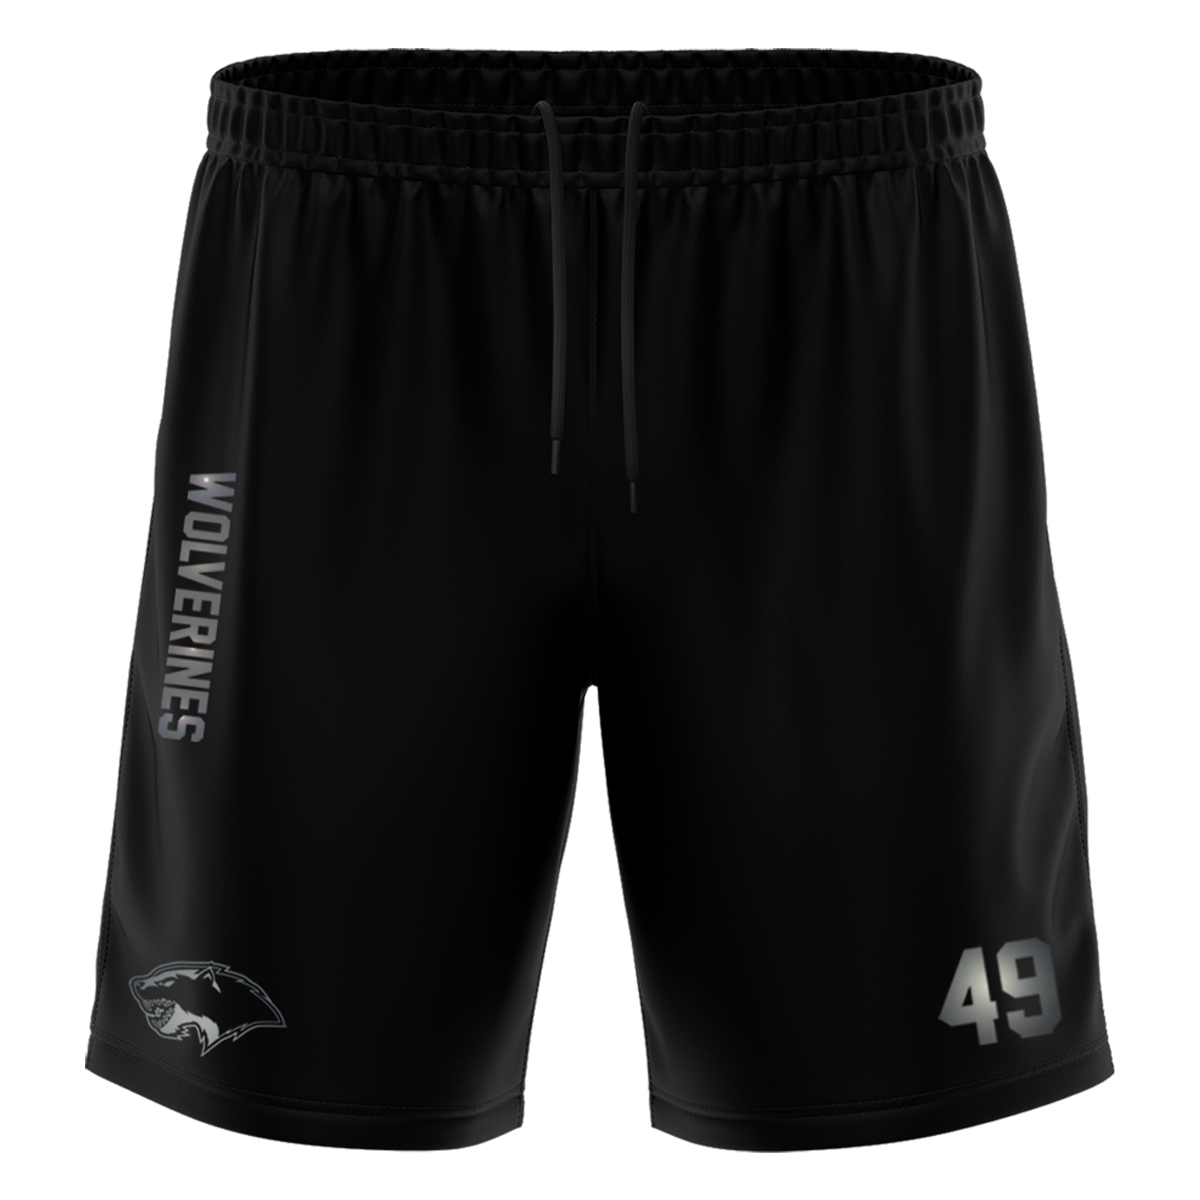 Wolverines "Blackline" Training Short with Playernumber or Initials